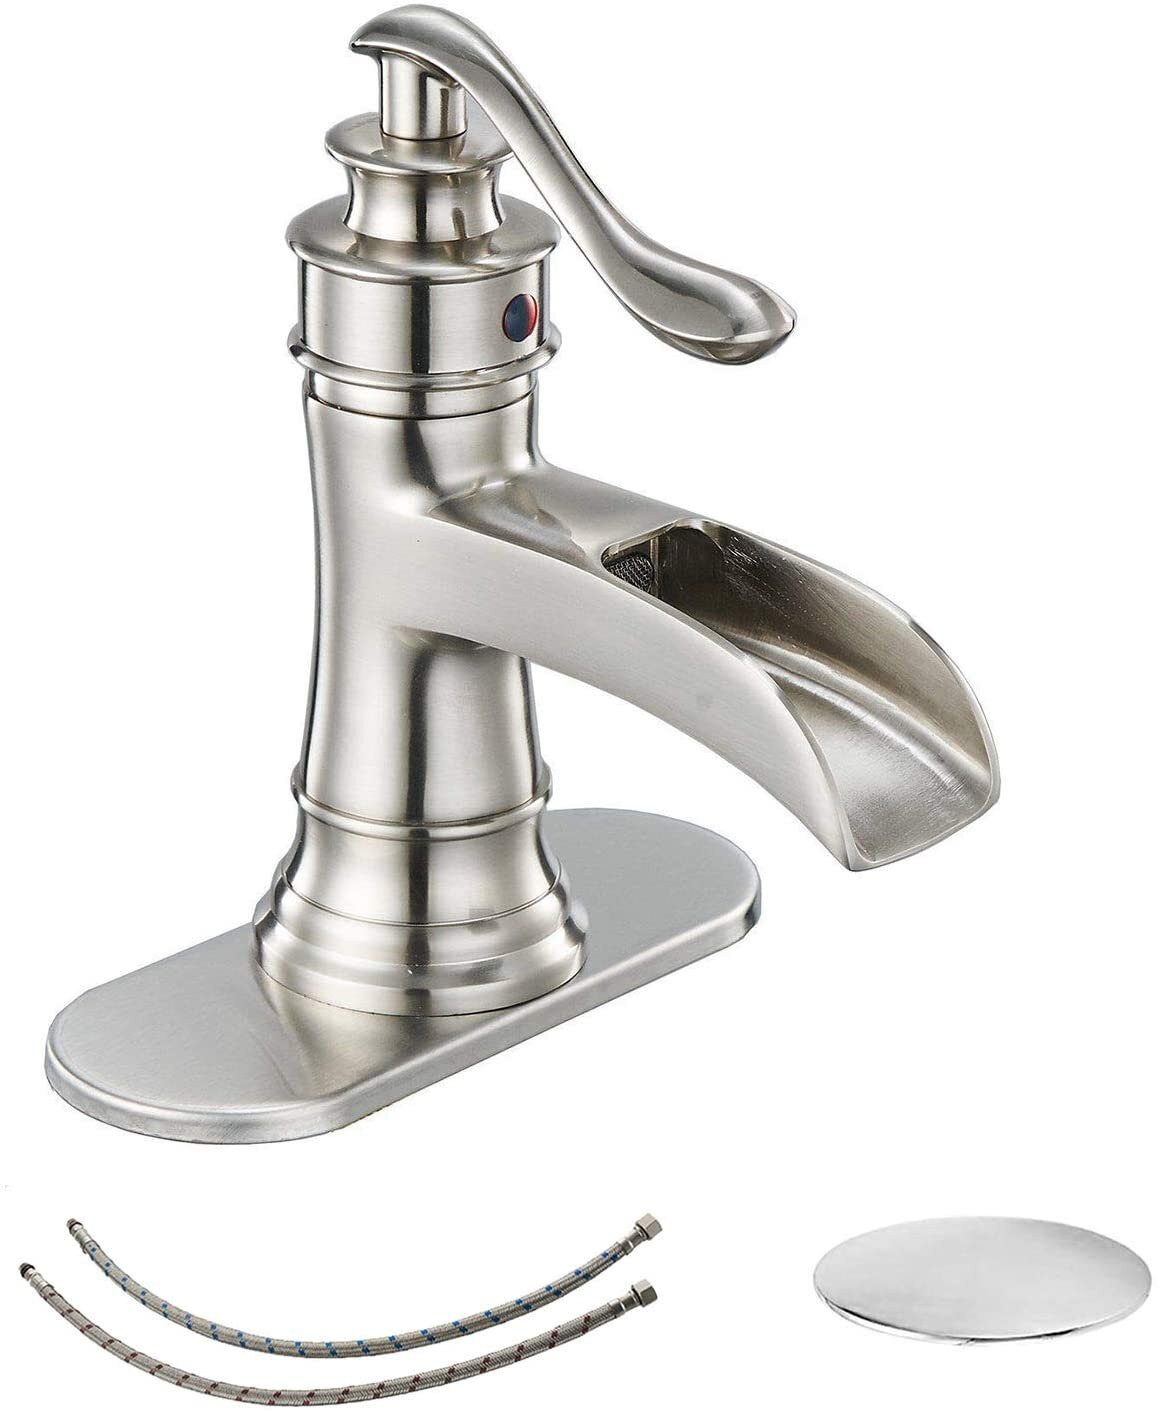 Waterfall Bathroom Faucet Stainless steel Single Handle Sink Tap 1Hole Mixer Tap 